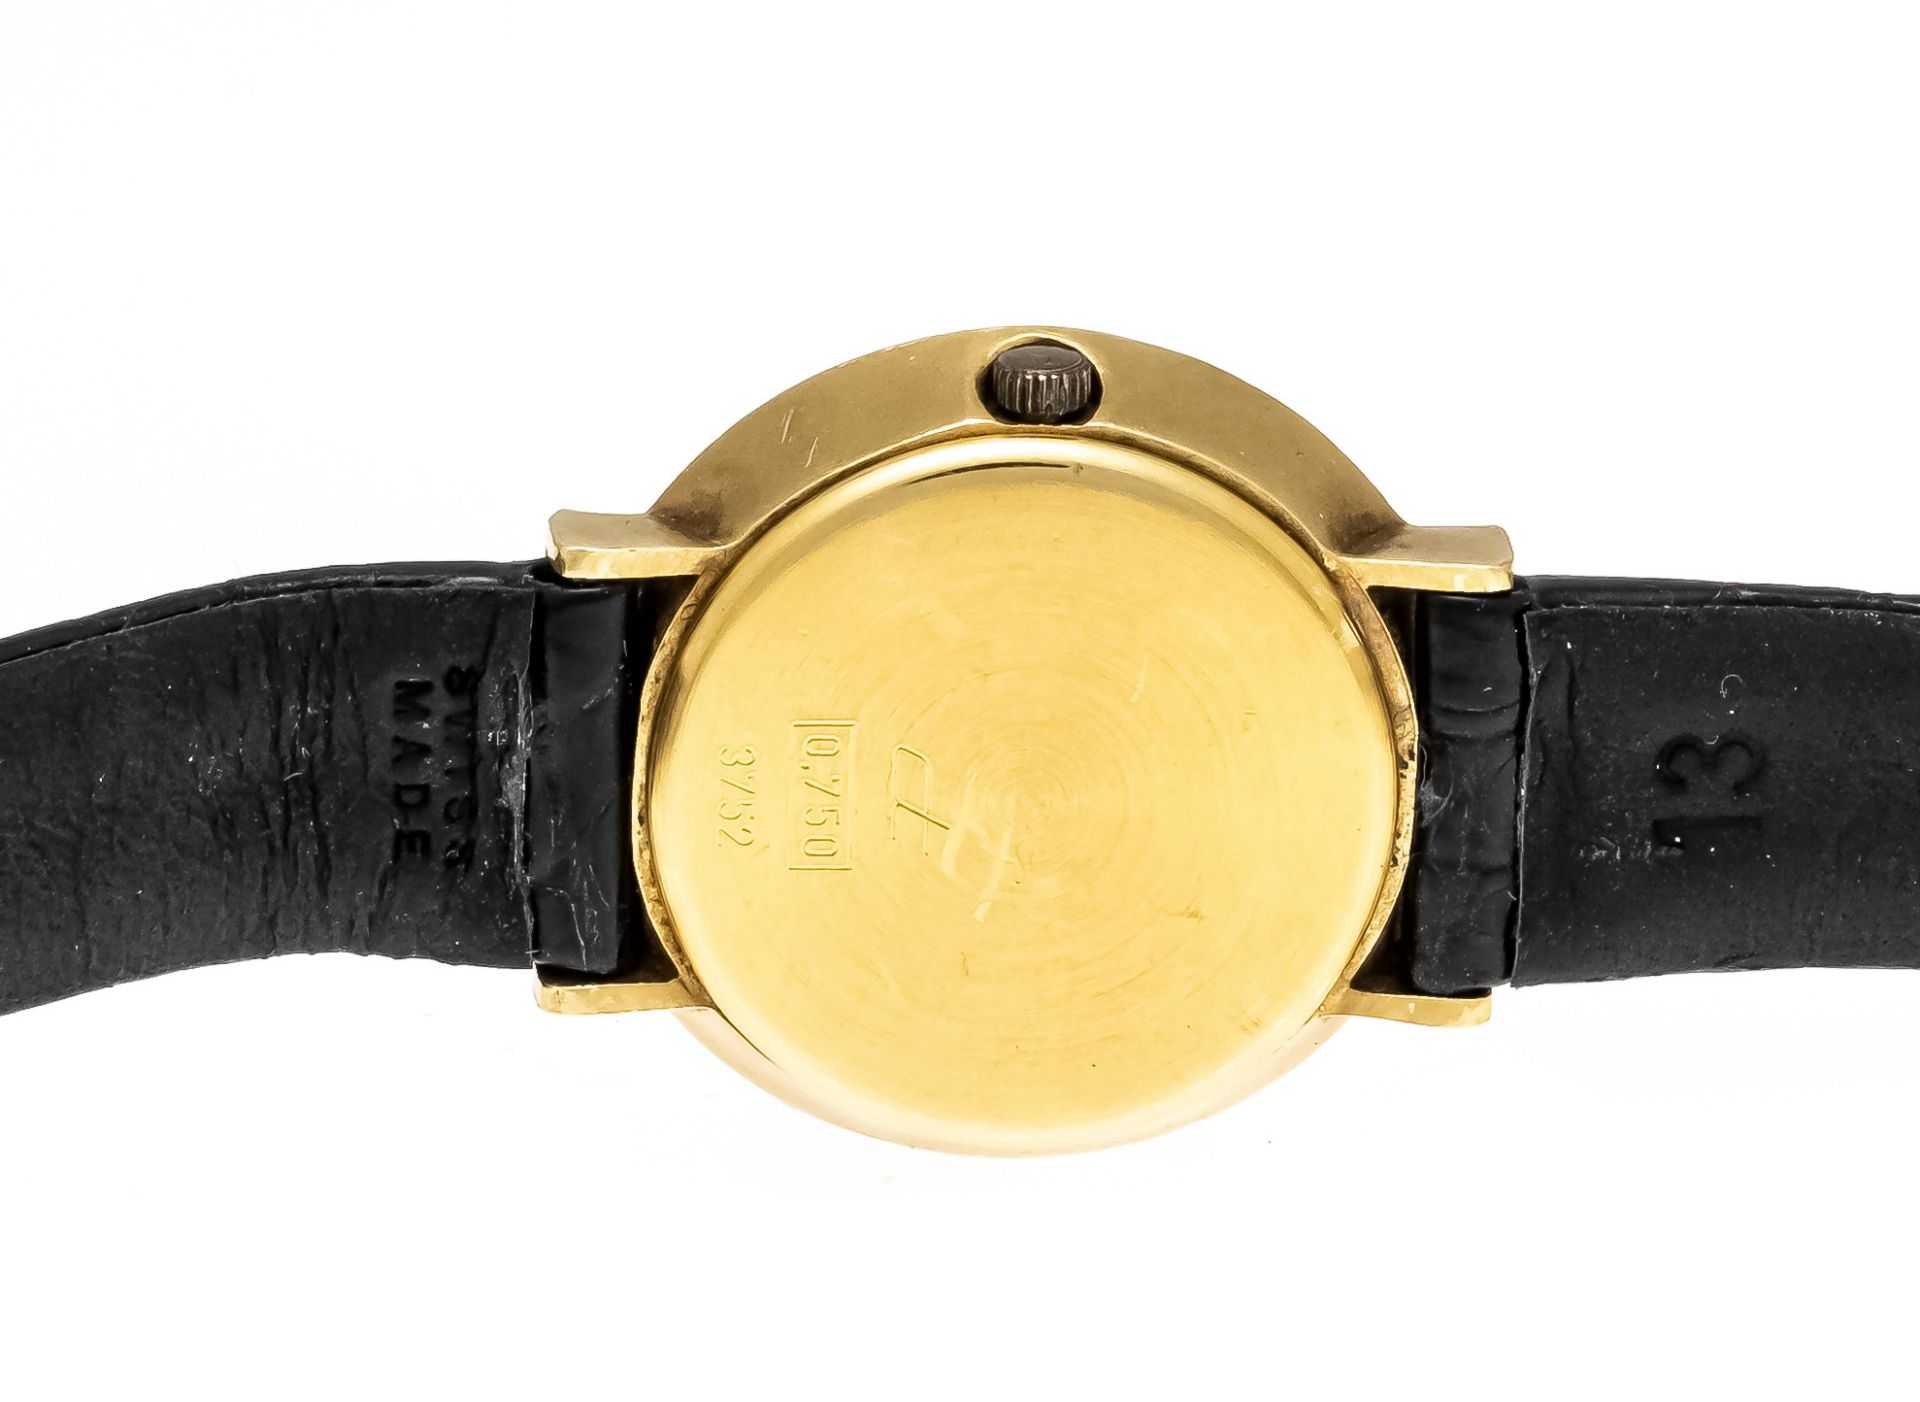 Ladies quartz watch CT Ref. 3752, 750/000 GG, polished case with traces of wear, fused gold dial, - Image 2 of 2